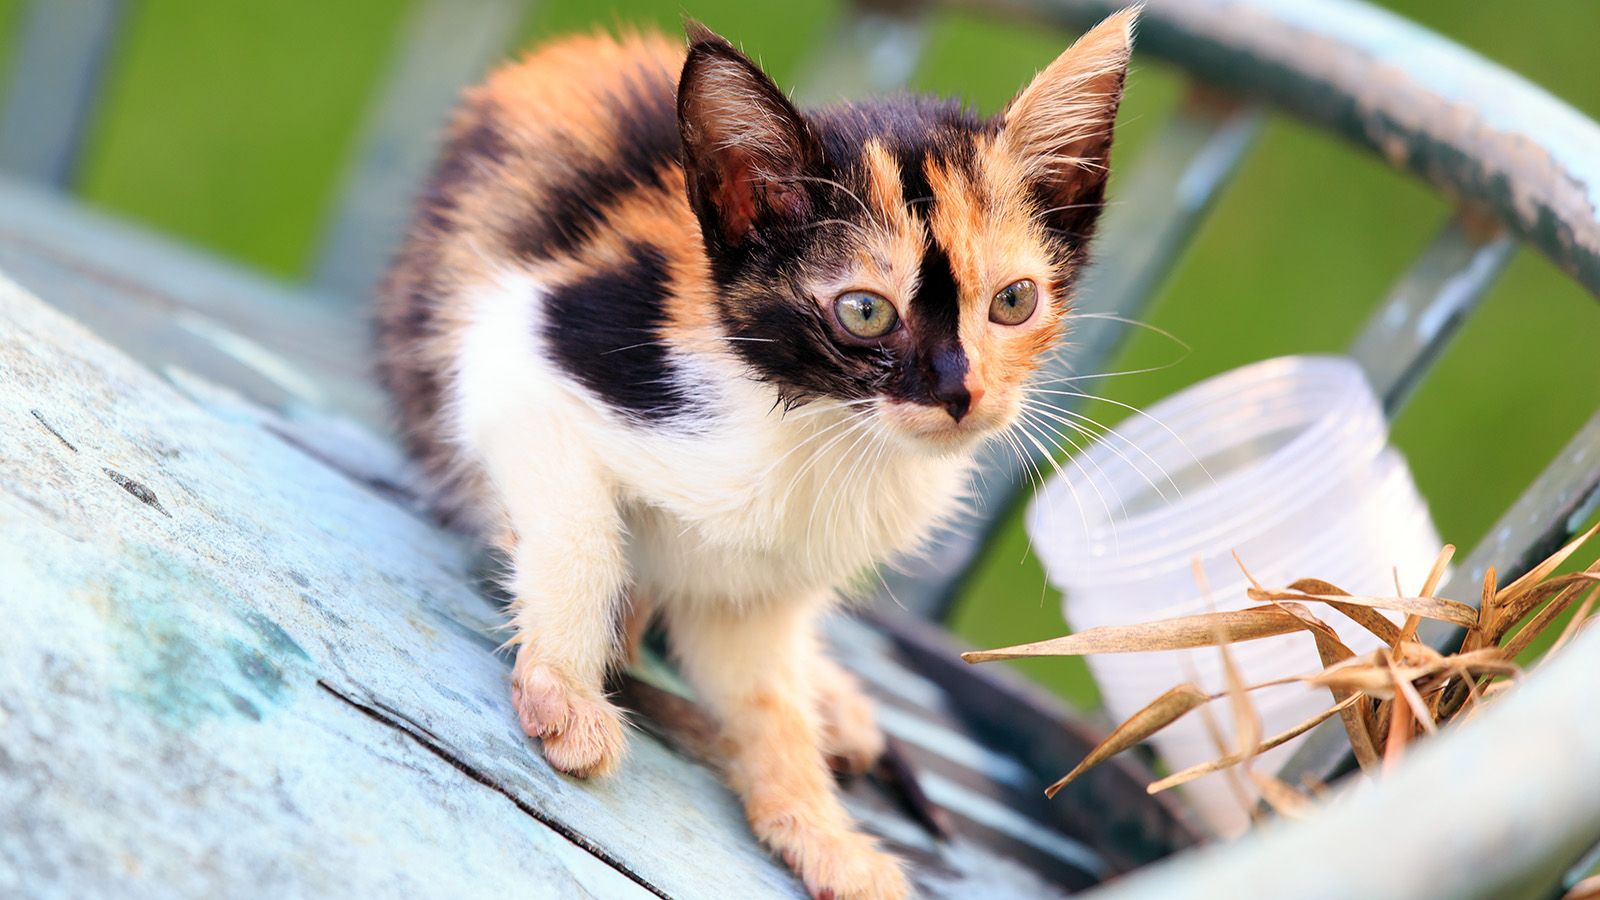 A Calico Cat Wears a Coat of Many Colors